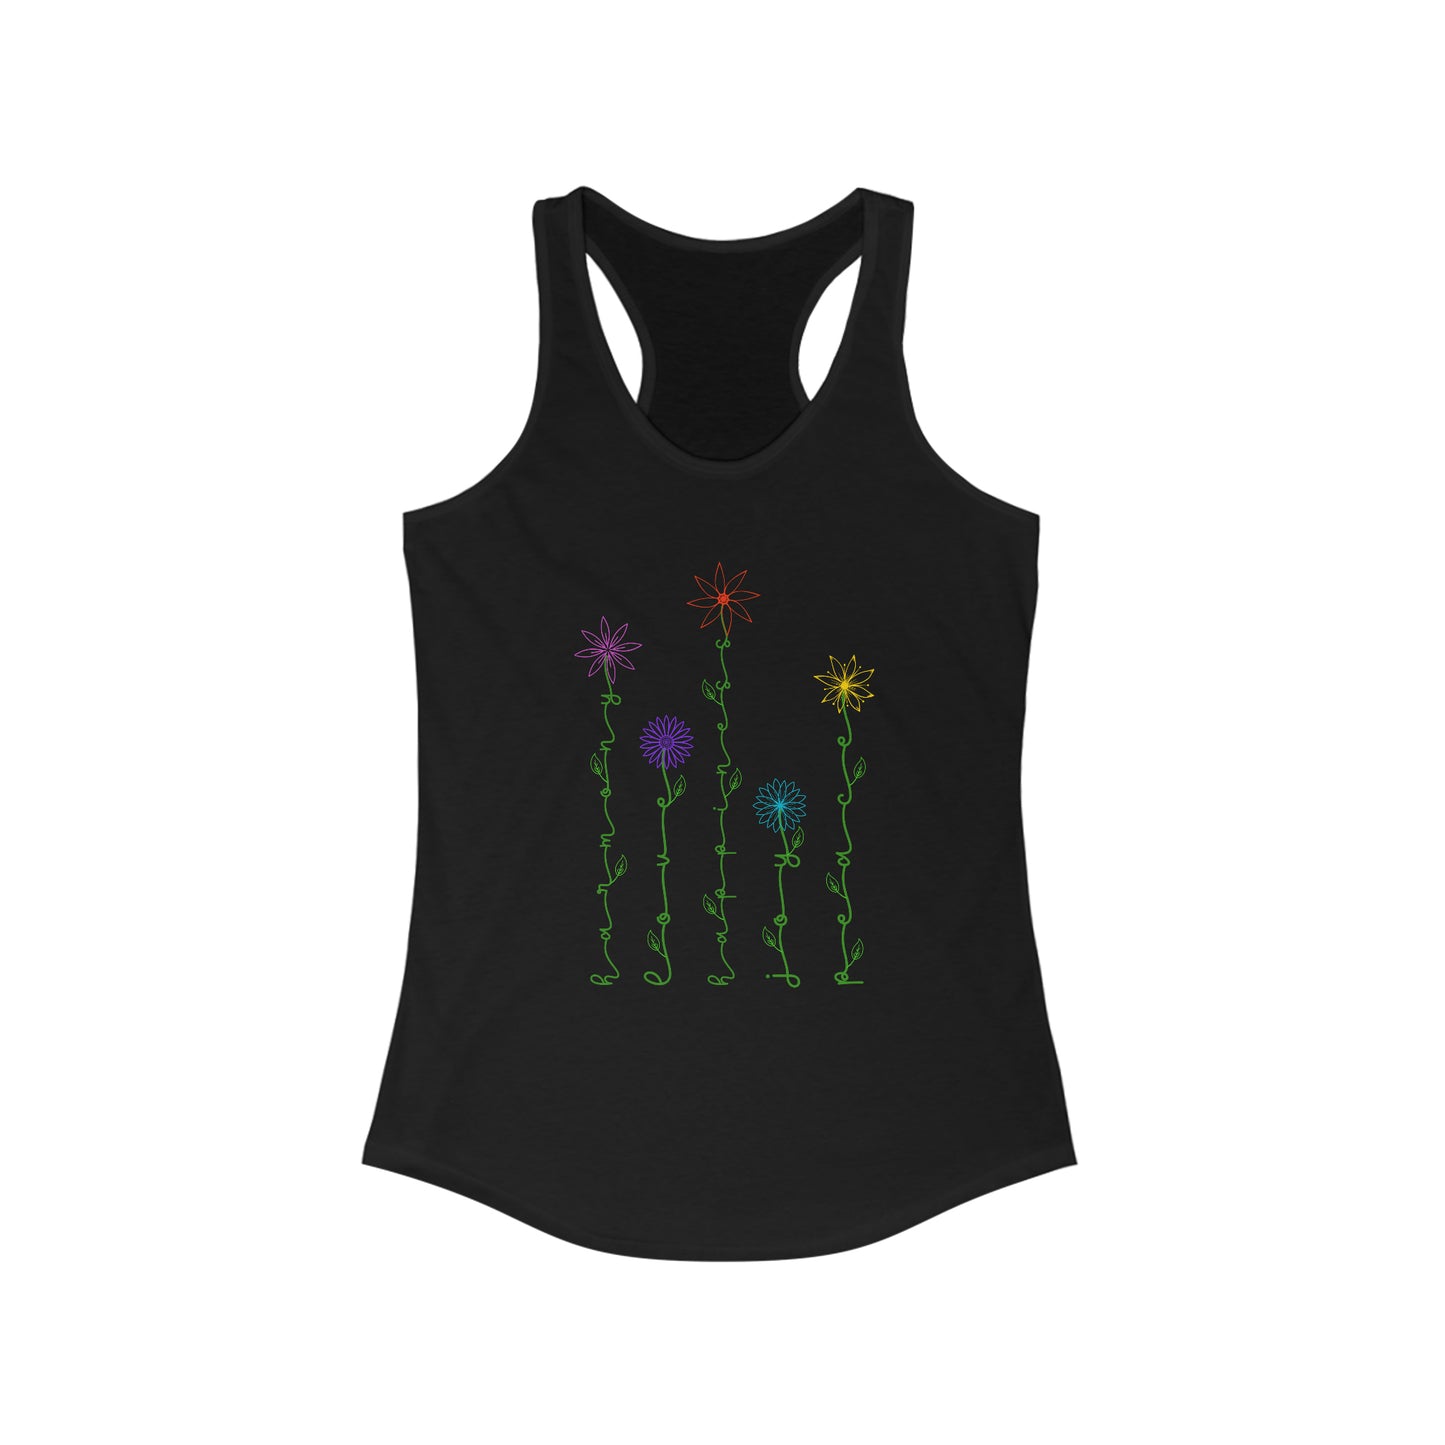 Wildflower Tank Top With Sentiments For Botanical Gift With Floral Print Tank Top For Mother's Day Tank Top For Friend Flowery Gift